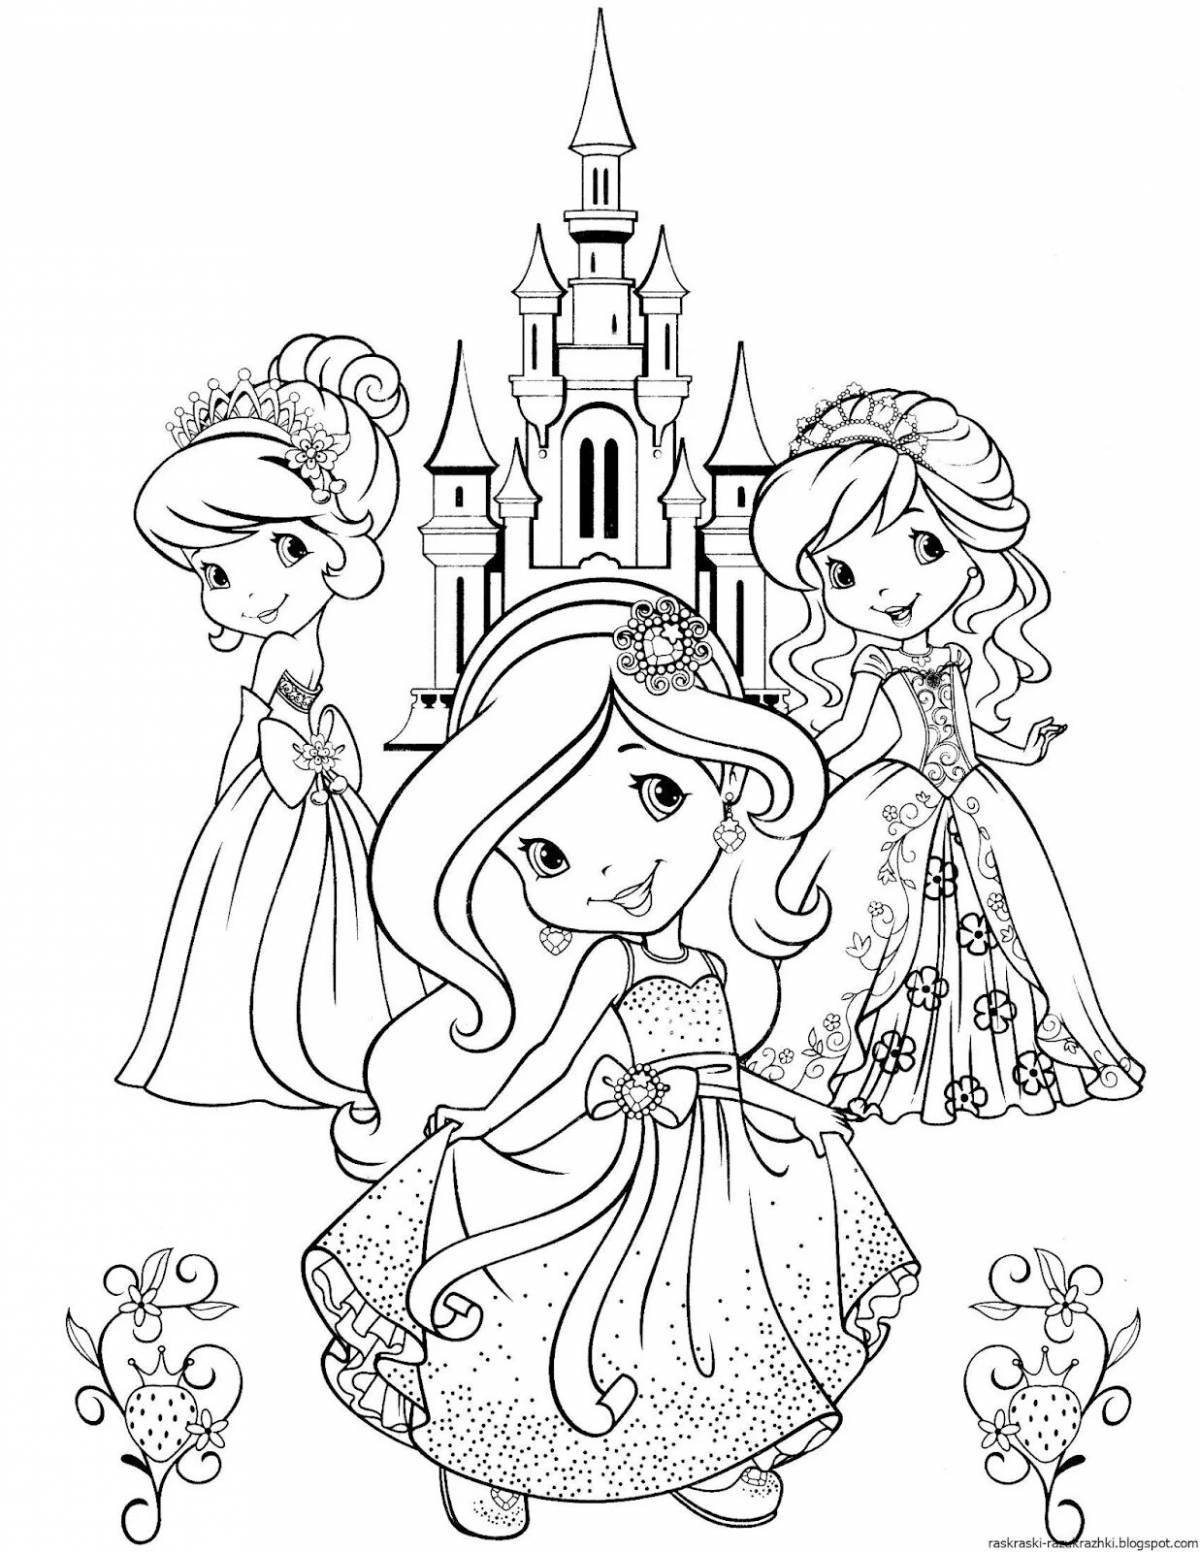 Mystical princess coloring book for girls 7 years old